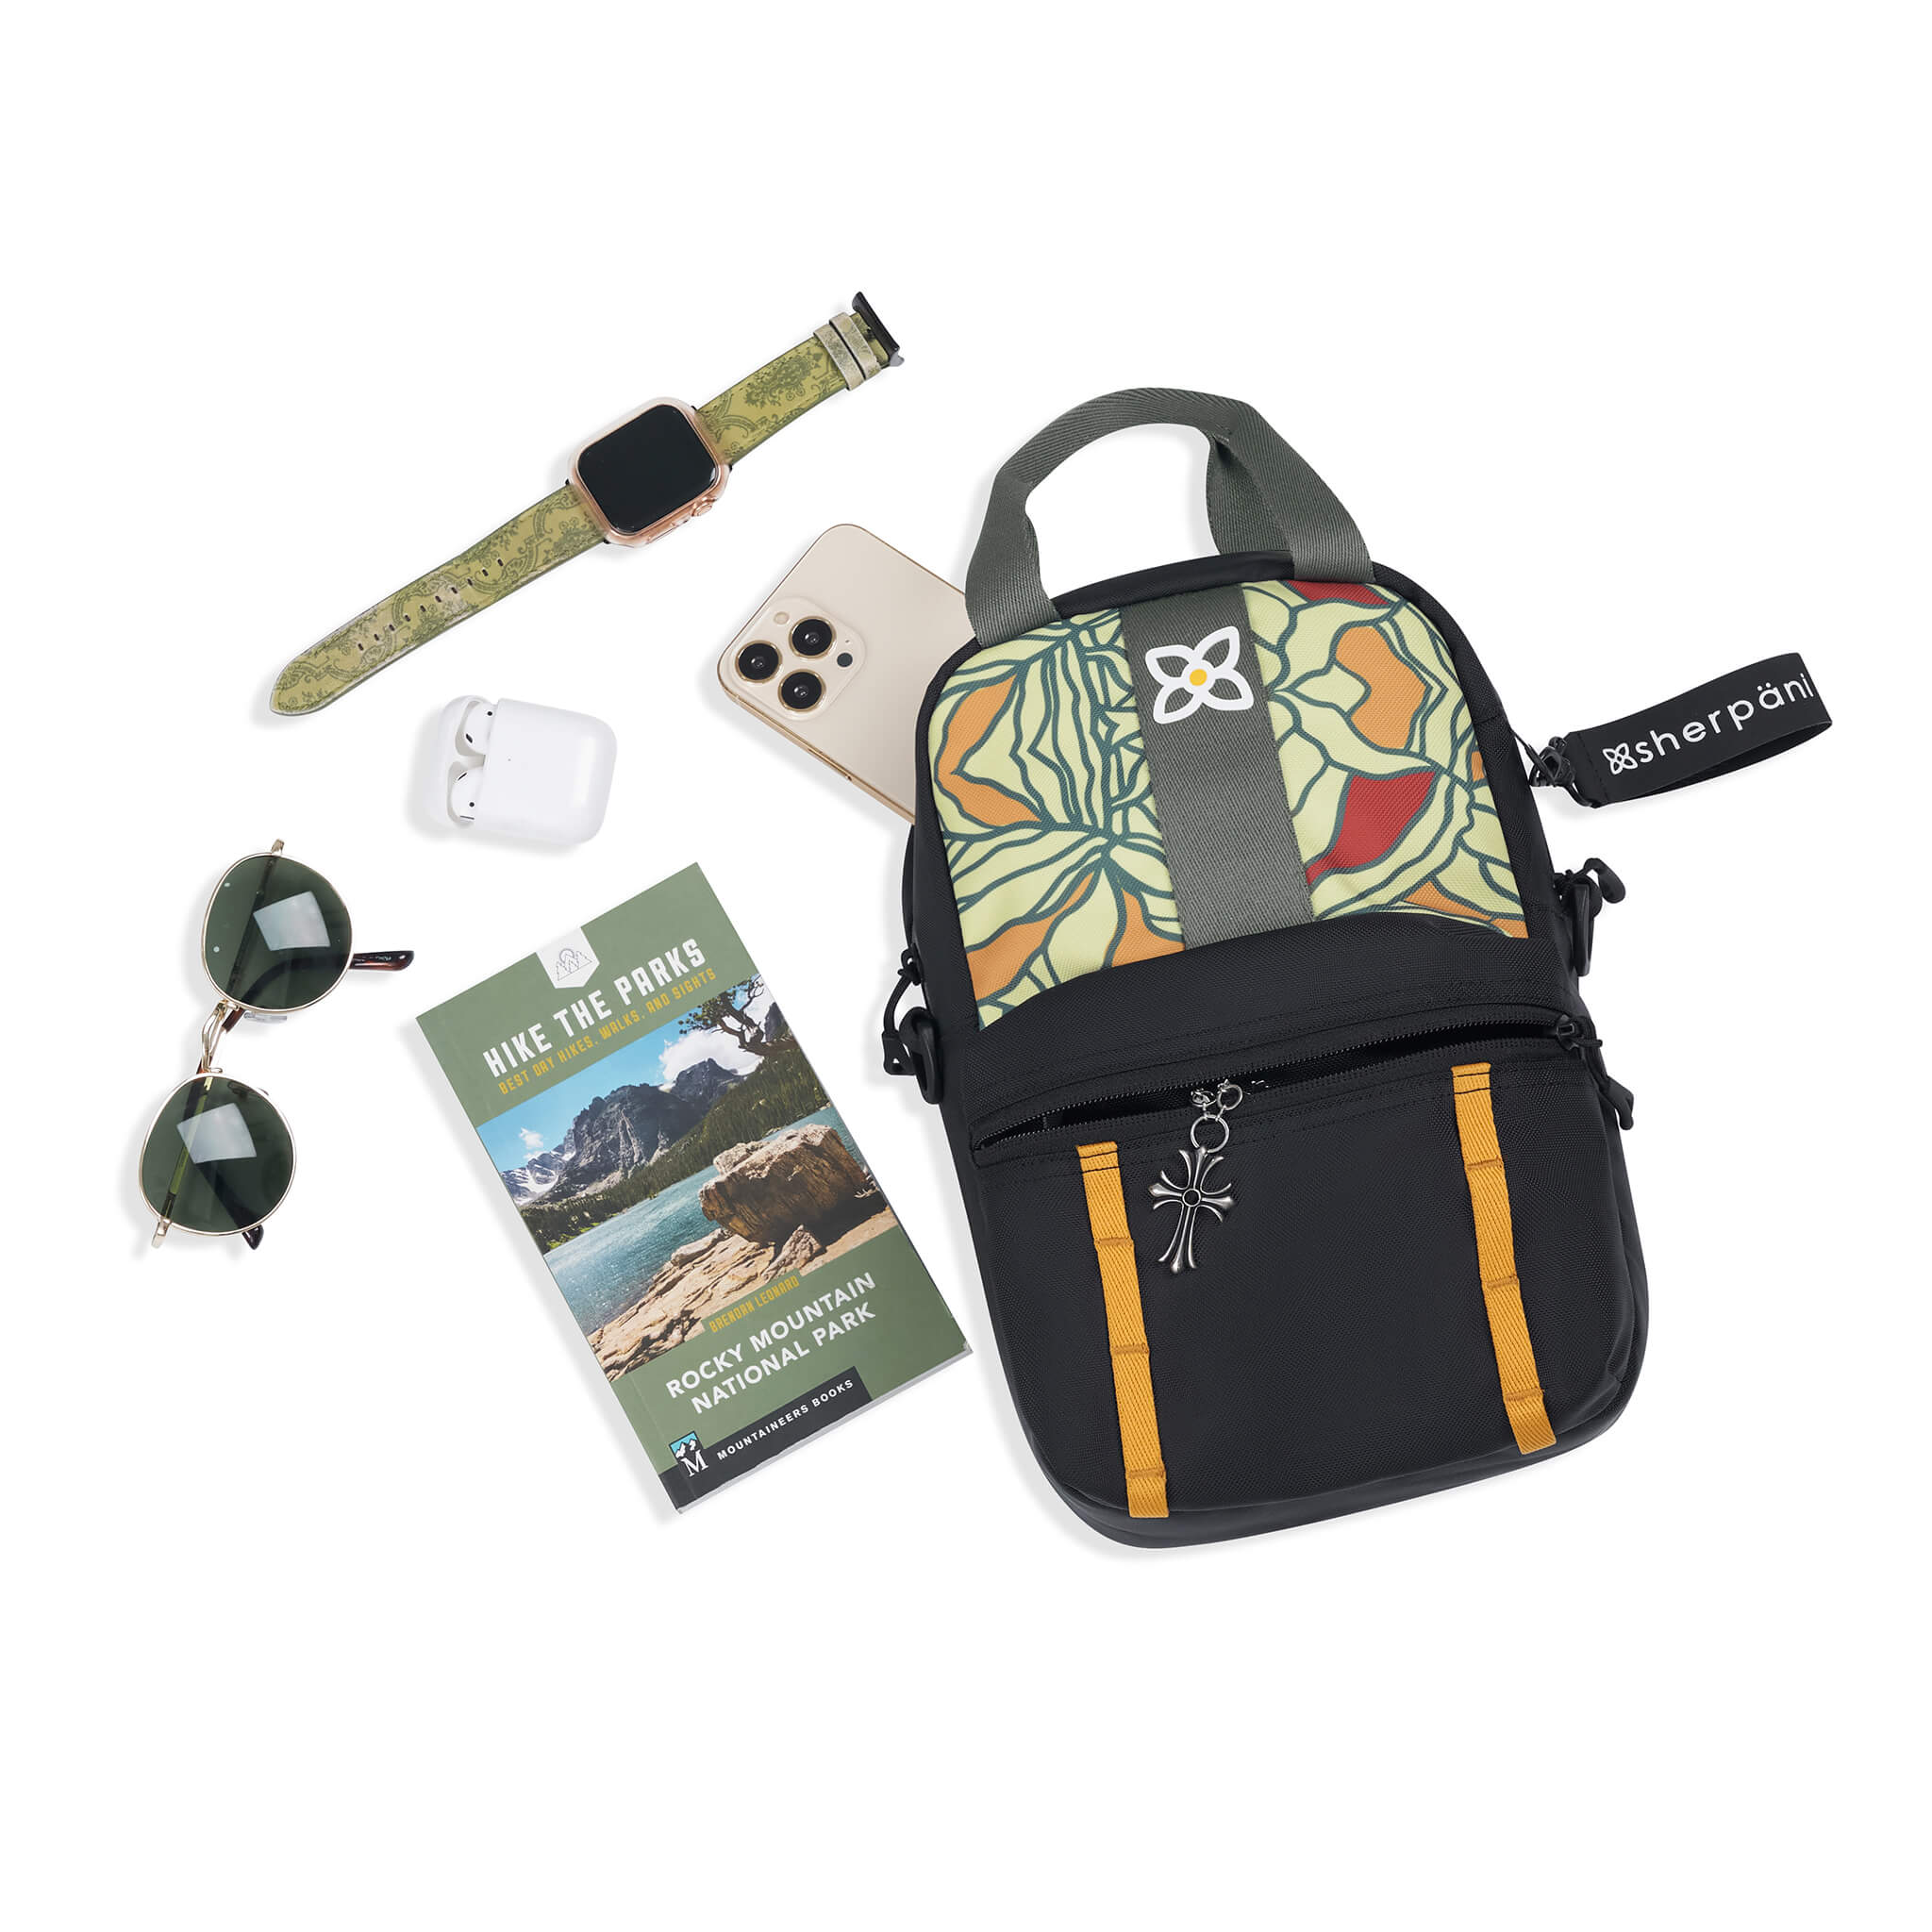 Top view of example items to fill the bag. Sherpani Logan mini backpack in Fiori lies next to the following items: smart watch, headphones, sunglasses, hiking guide and phone. 